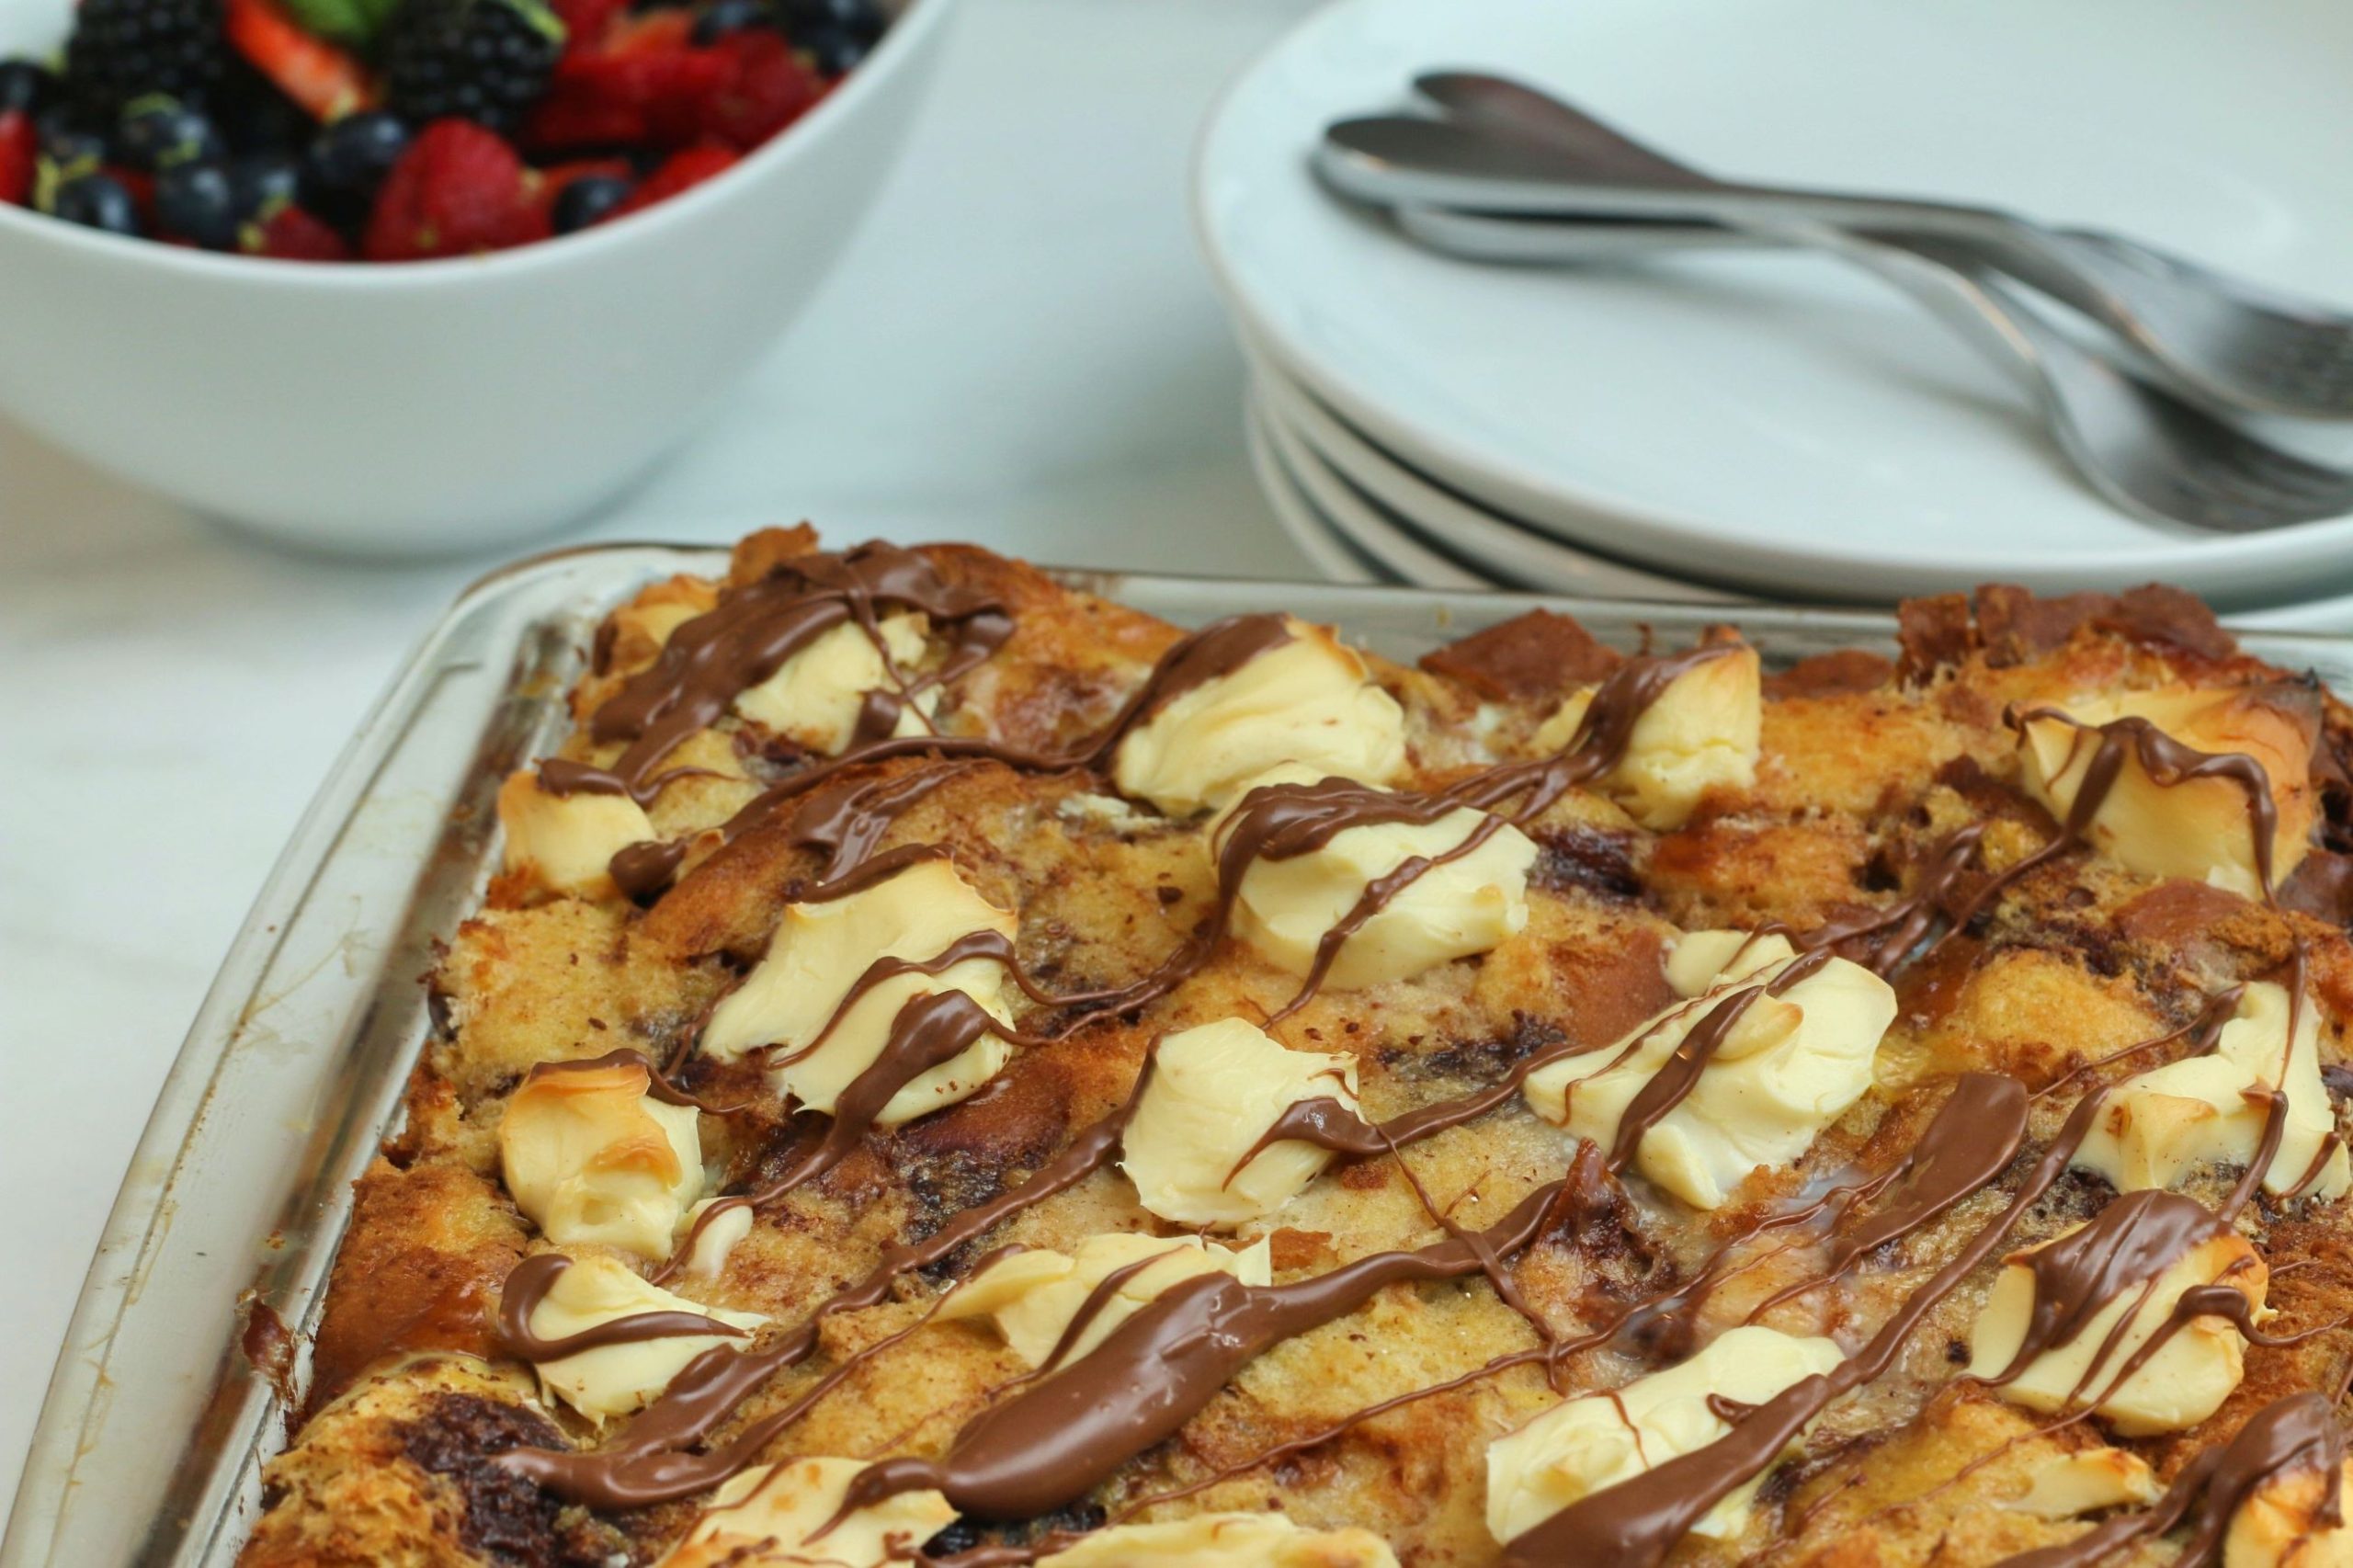 Nutella and Cream Cheese Baked French Toast